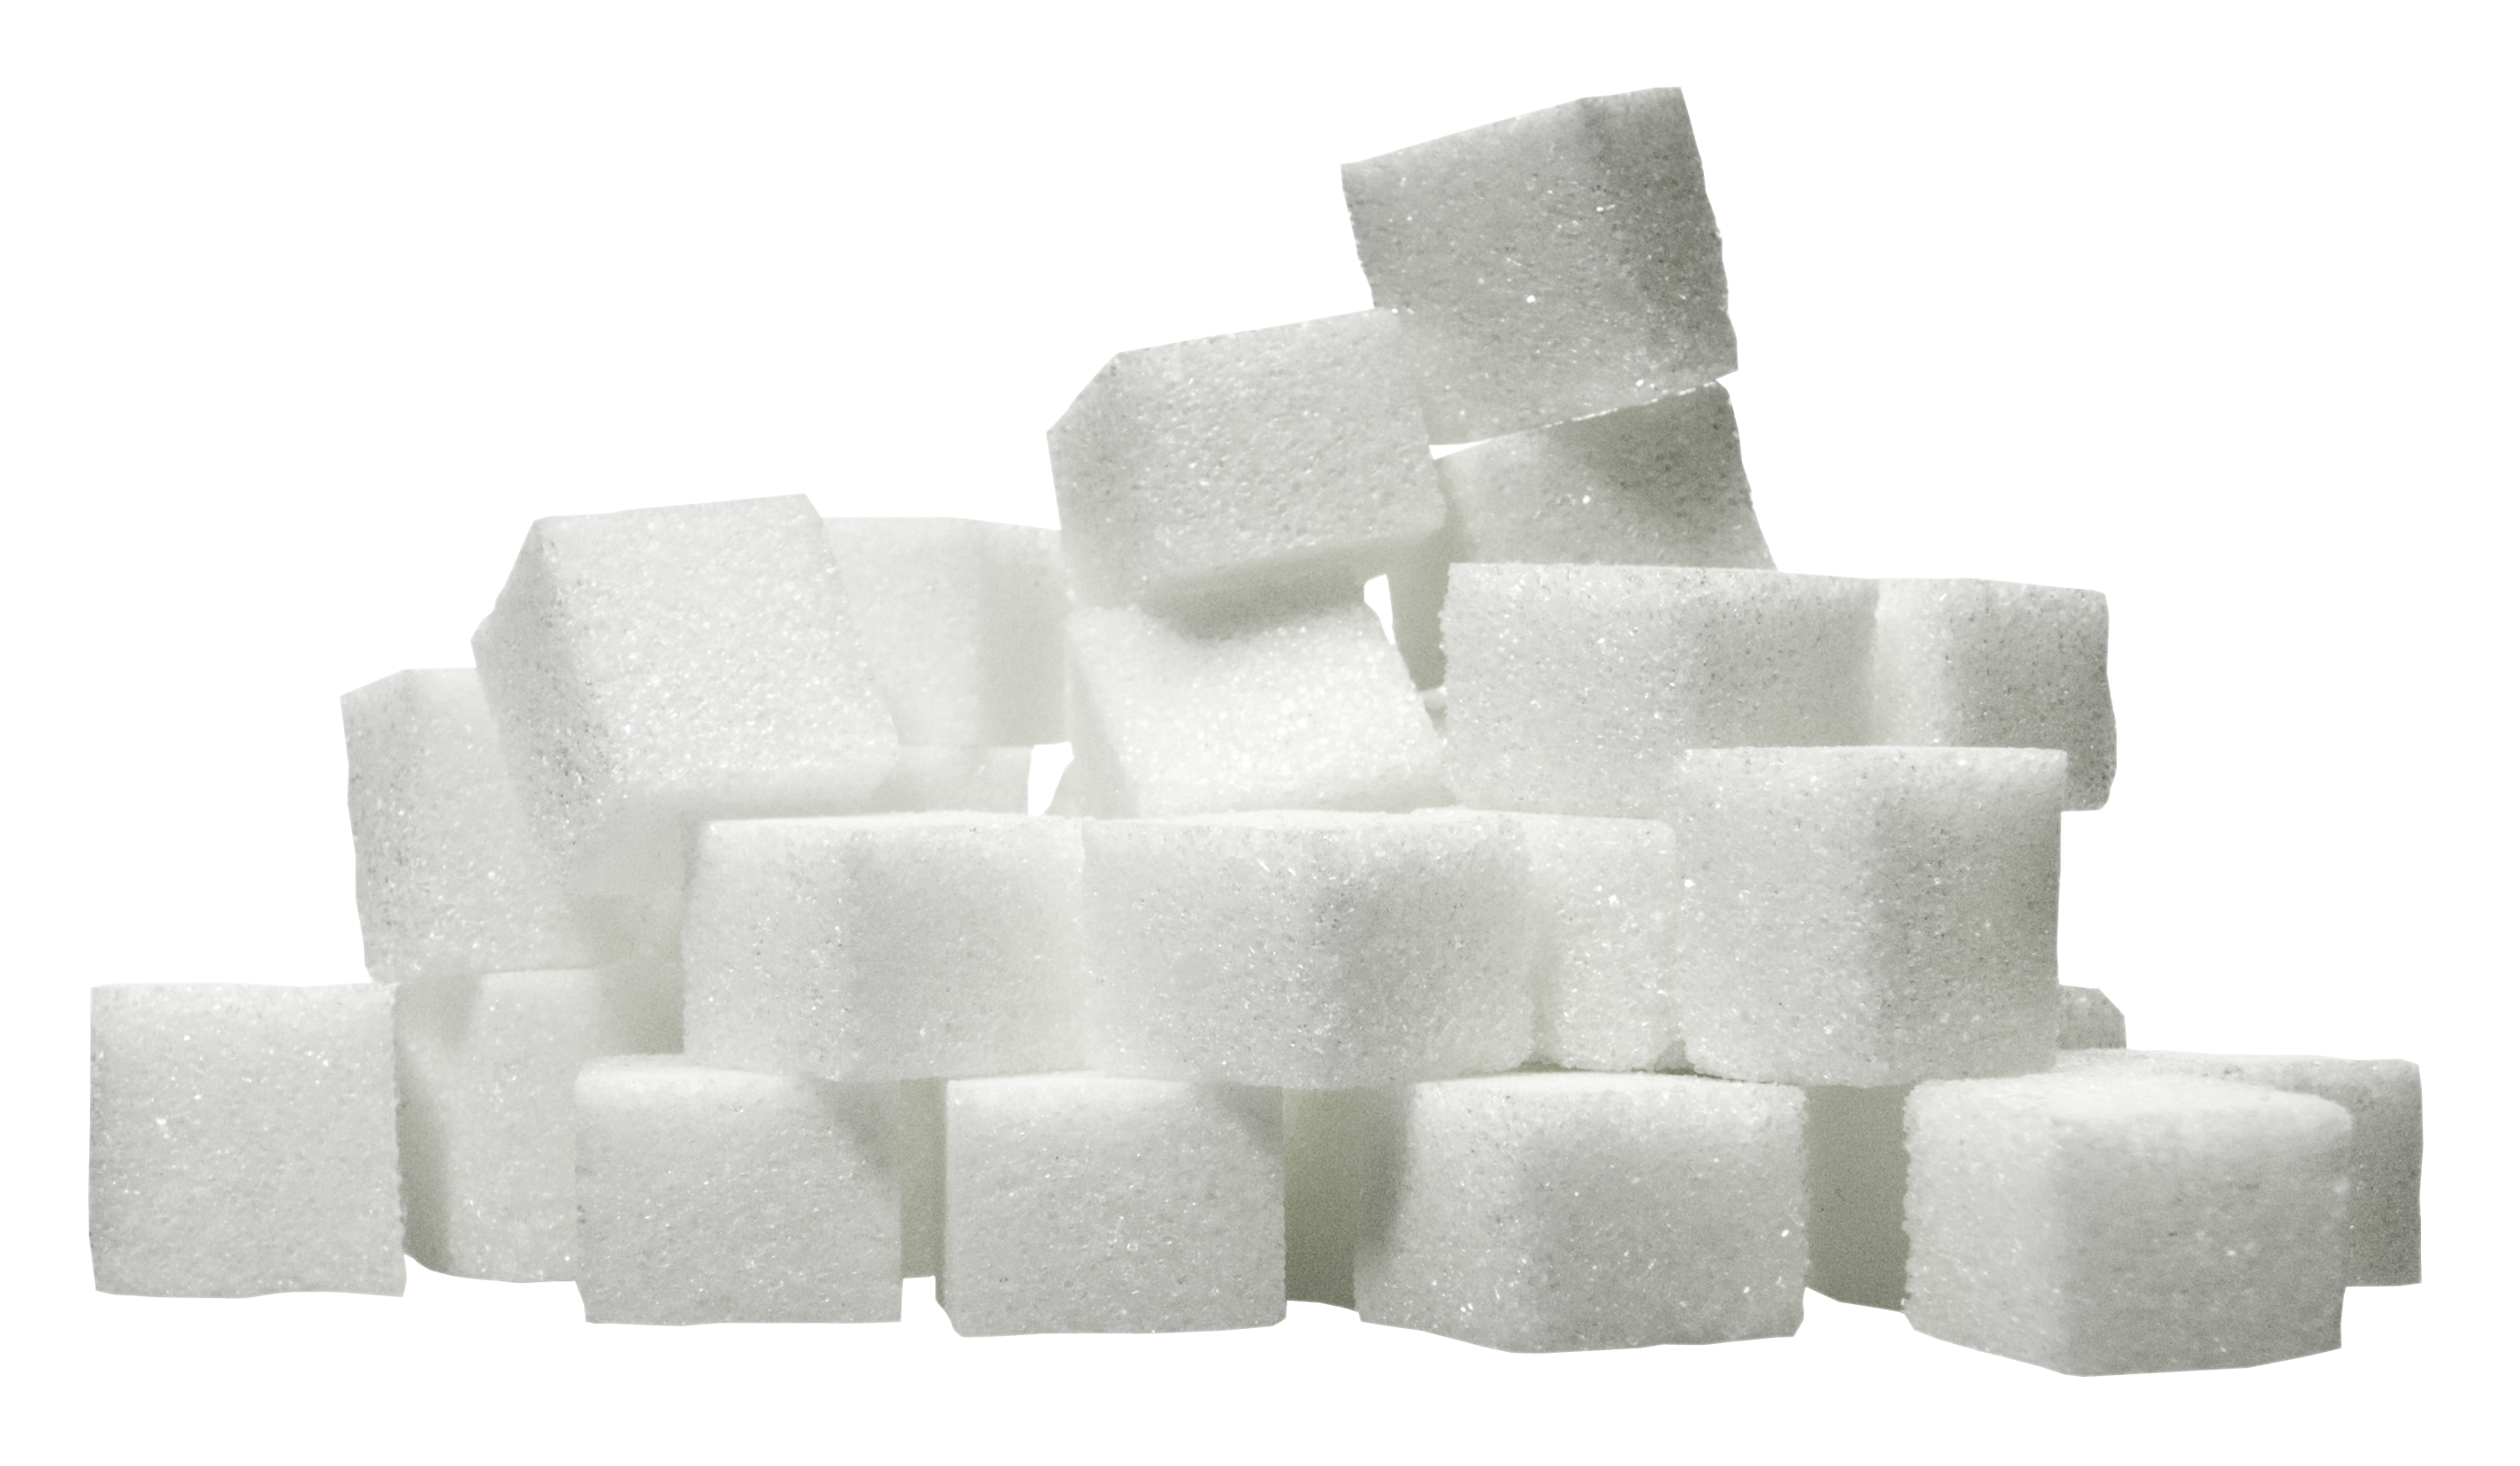 Sugar cubes, which are used t